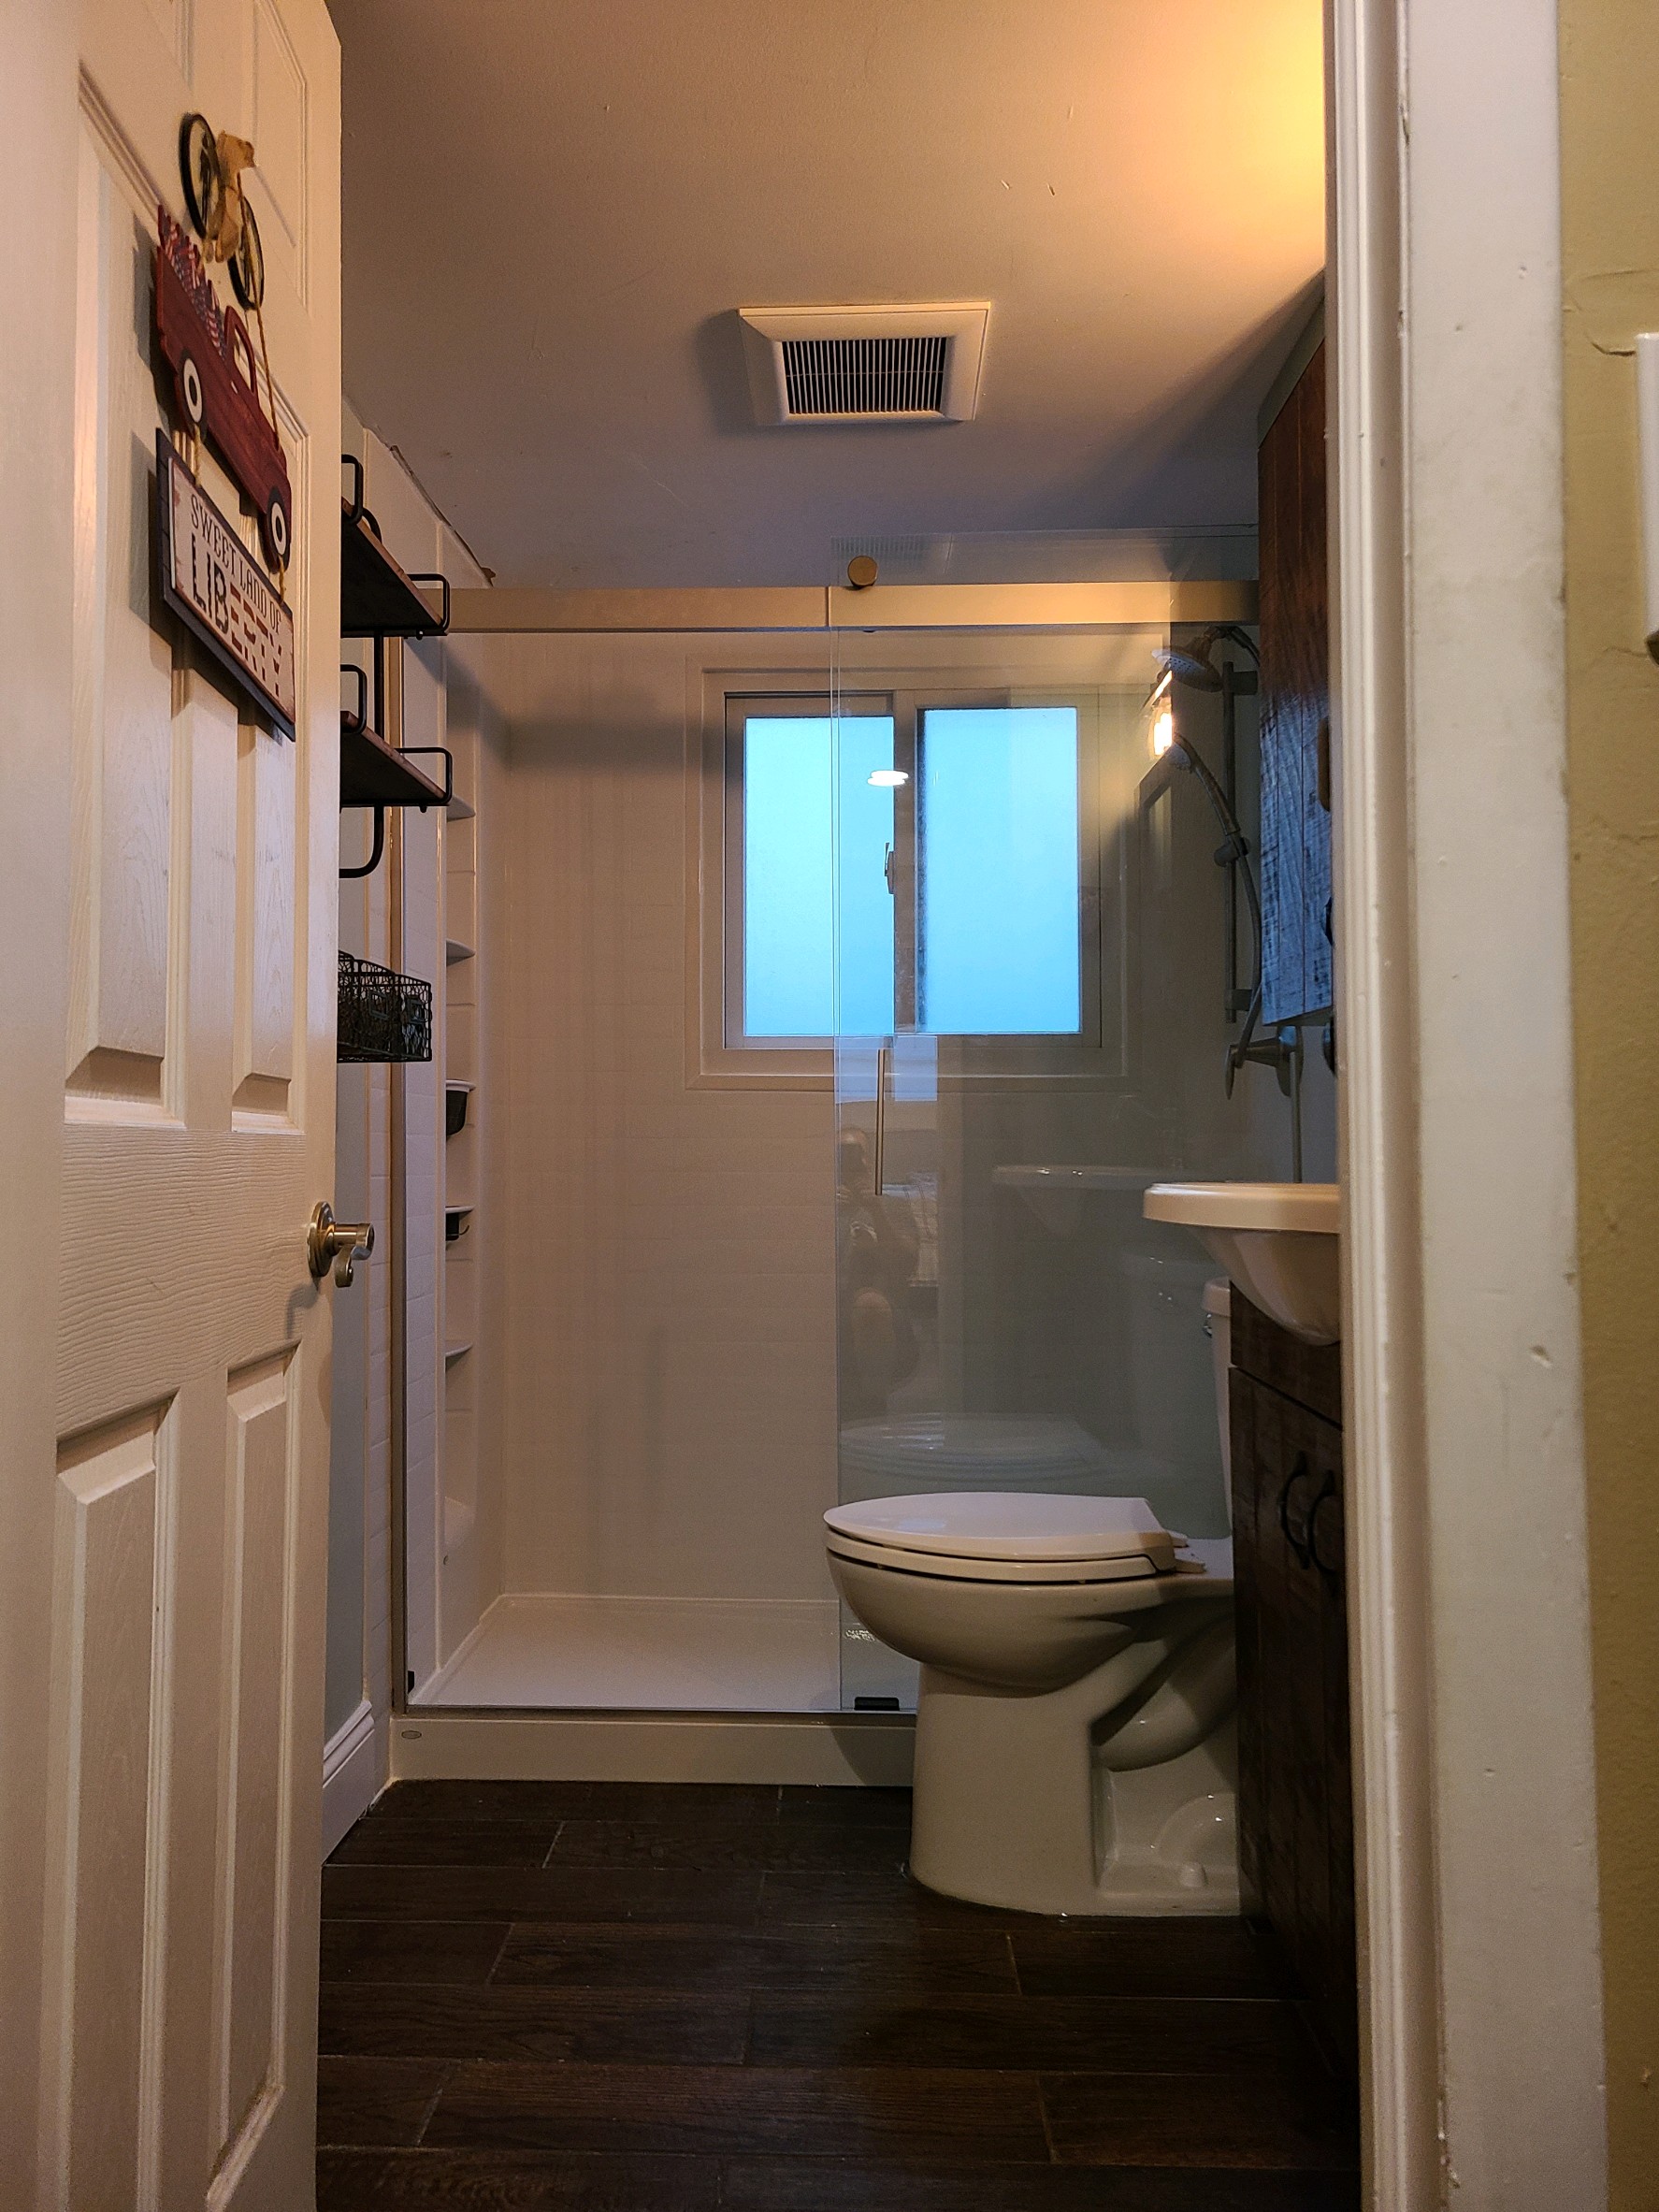 Bathroom Renovation And Remodeling